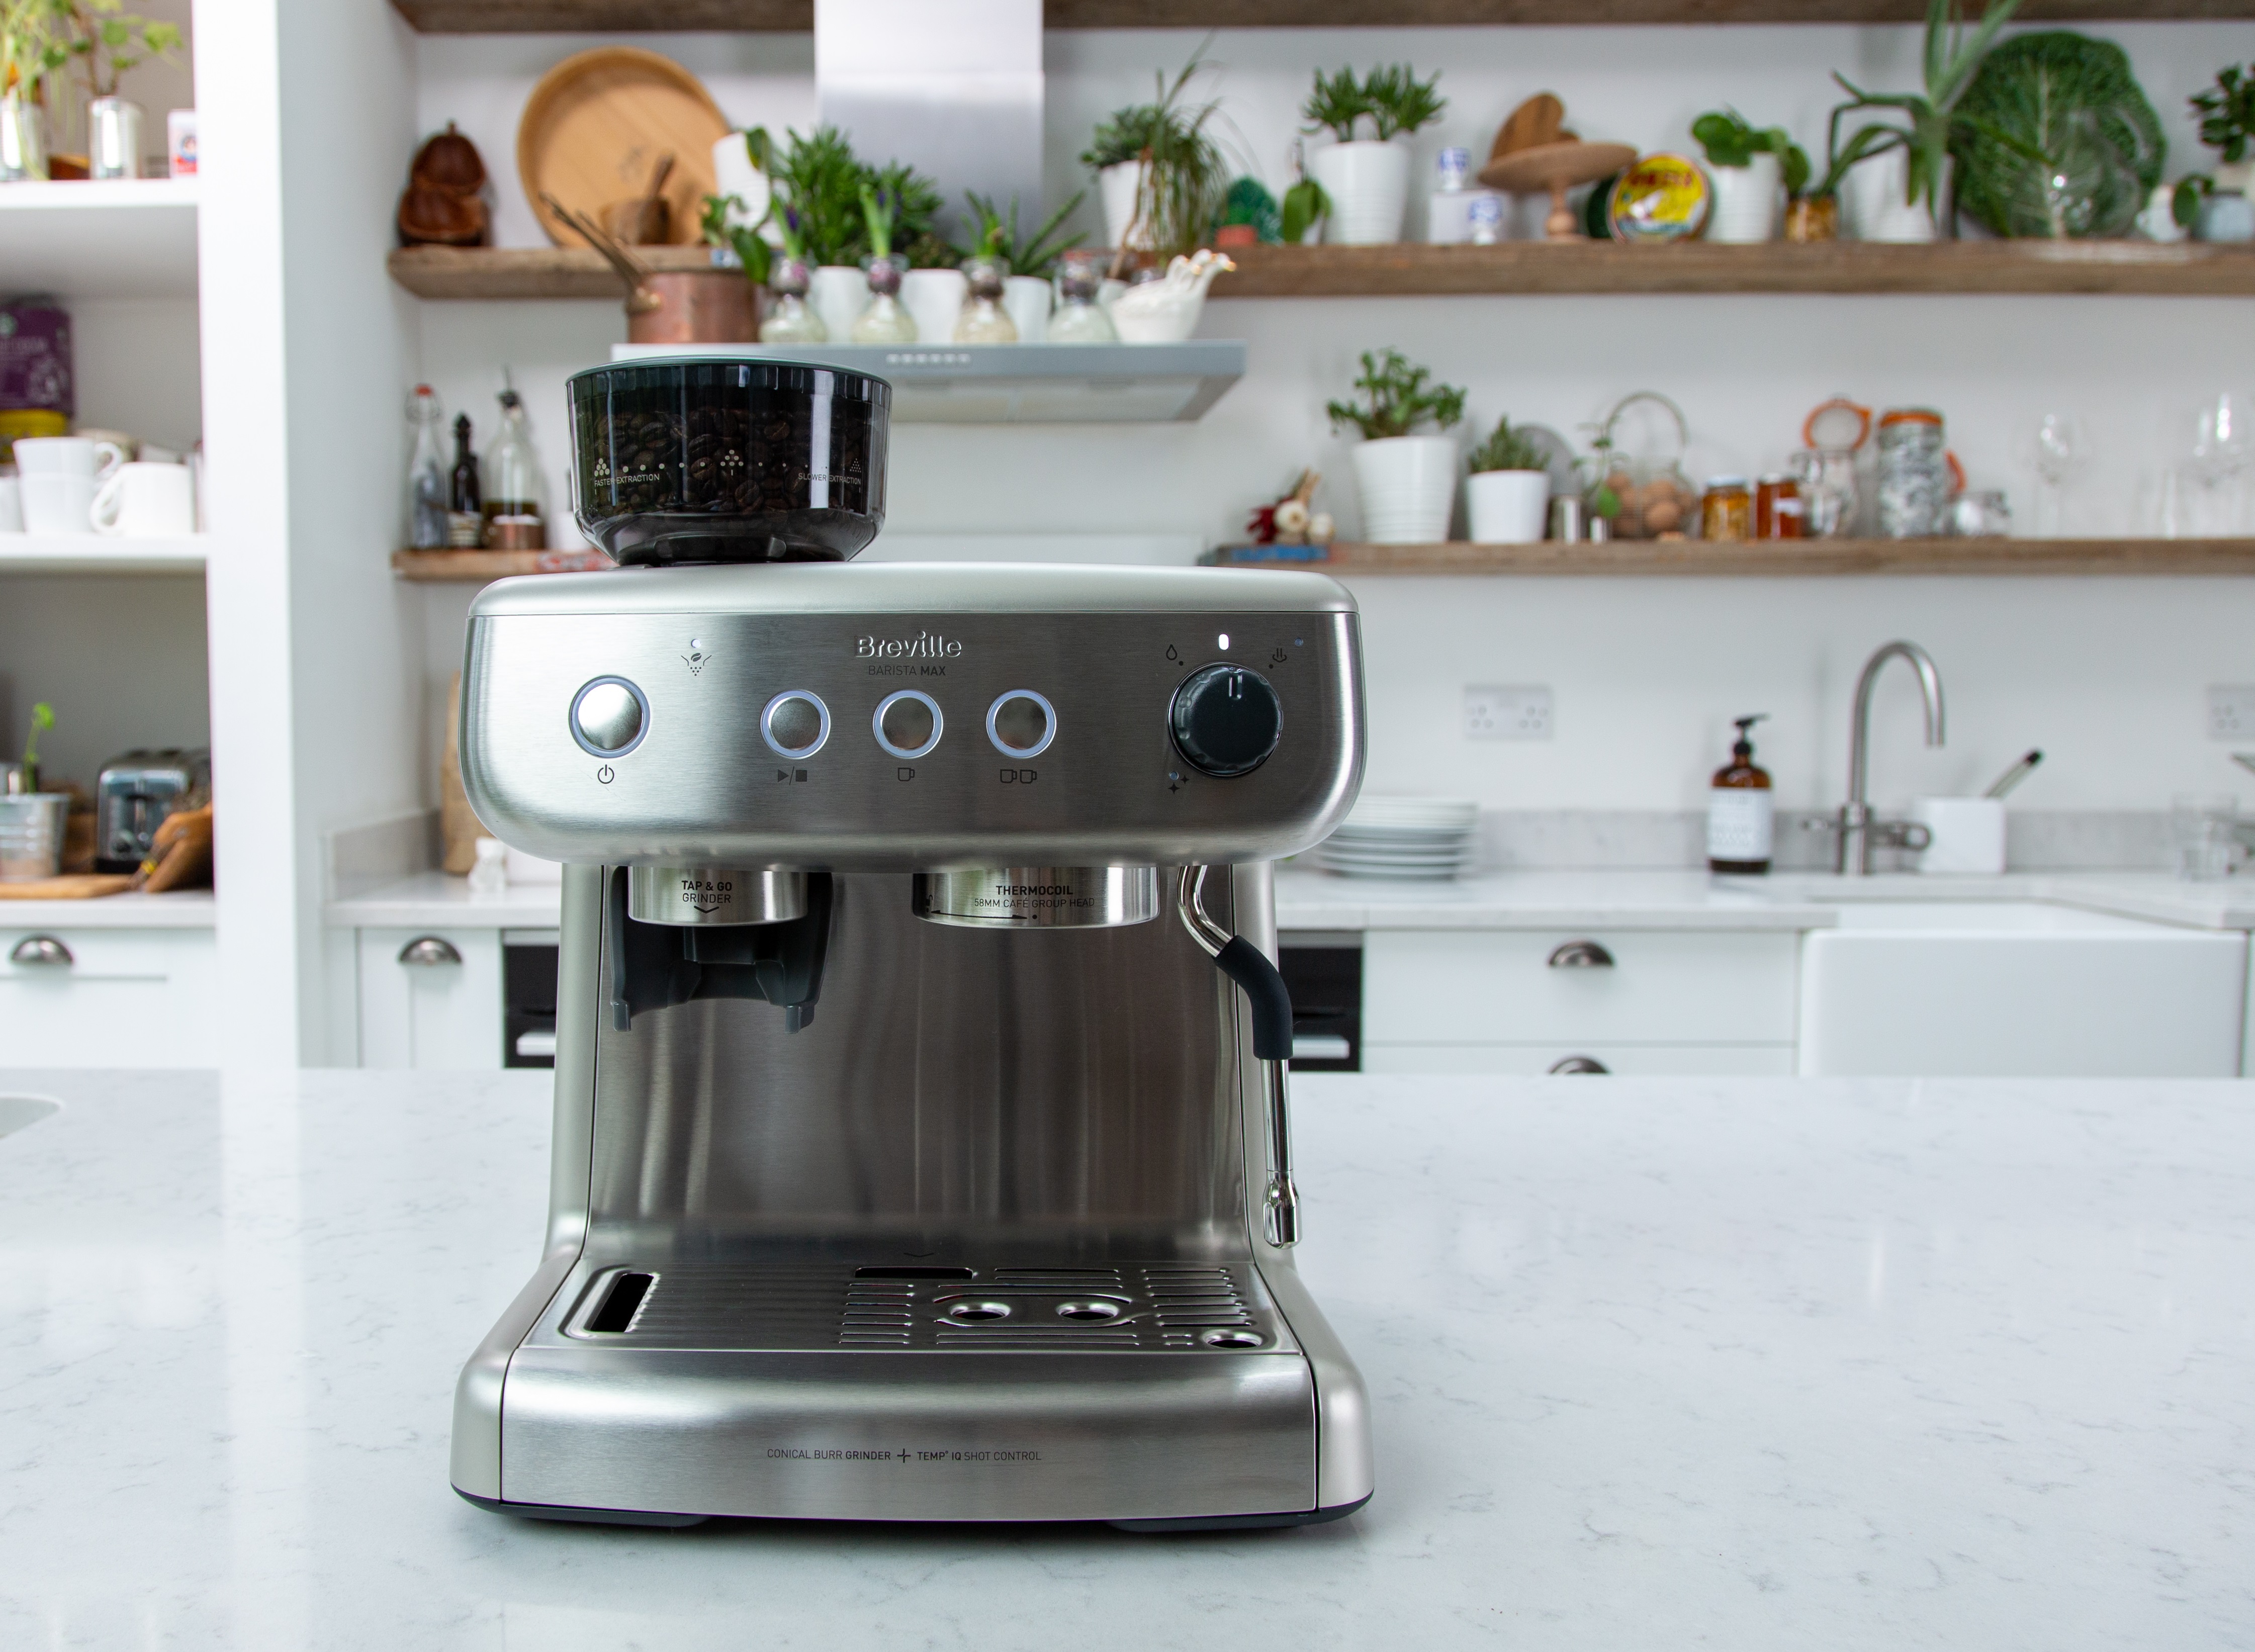 How good are Breville built-in grinders on their machines? I have